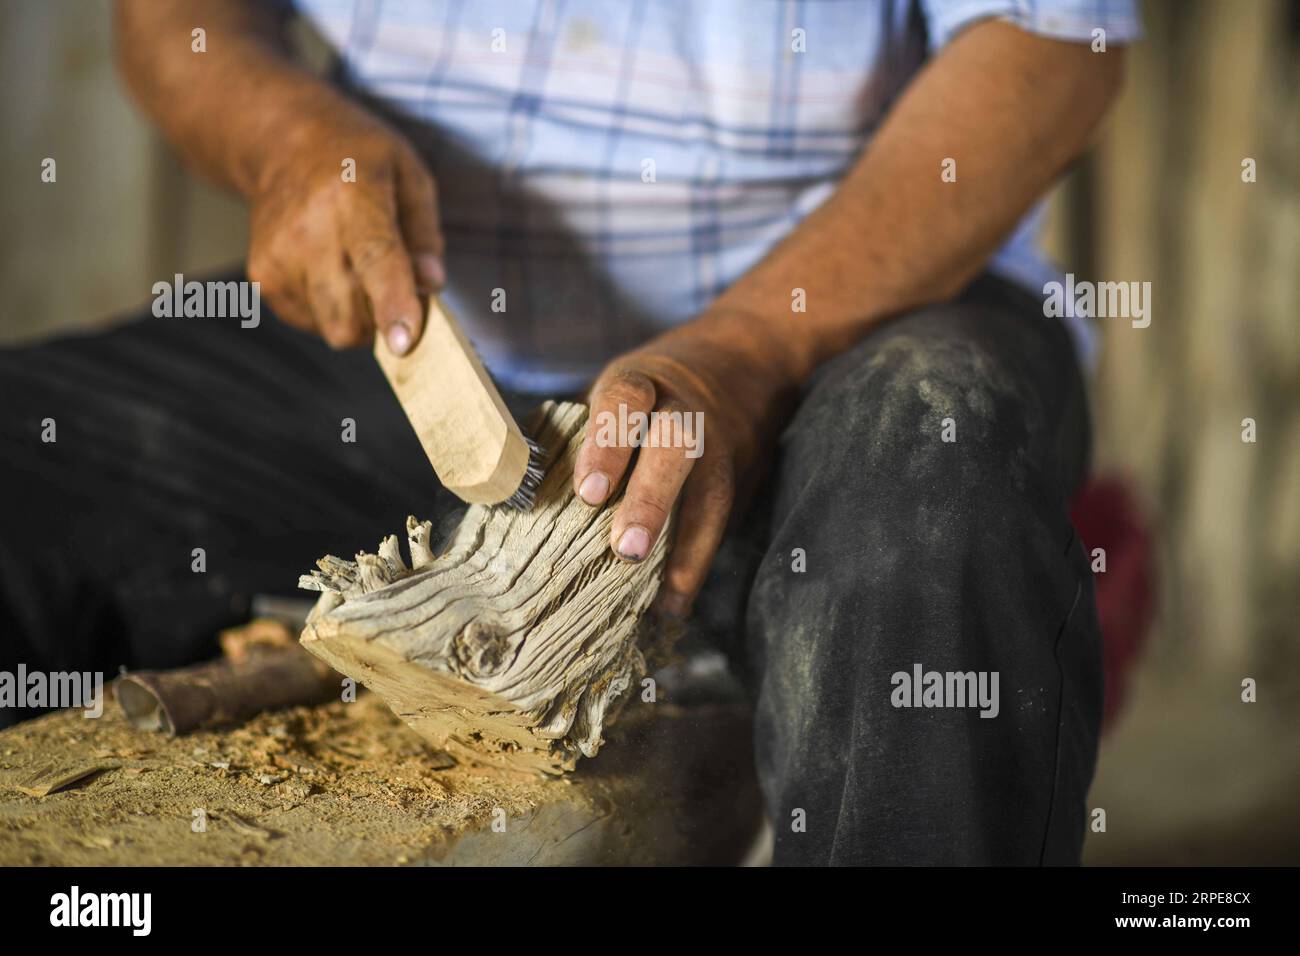 (190821) -- YULI, Aug. 21, 2019 -- Amudun Abudu makes a pen holder in Lop Nur People Village in Yuli County, northwest China s Xinjiang Uygur Autonomous Region, June 21, 2019. Lop Nur People Village is located in Yuli County, where Tarim River flows through the deserts with populus euphratica forests reflection on the shimmering waves. Amudun Abudu, a 61-year old typical Lop Nur villager, works in local tourism industry. With the changes of the times, many Lop Nur people have various options for a living, yet he insists on the tradition of fishing in rivers and lakes. Not only does he make del Stock Photo